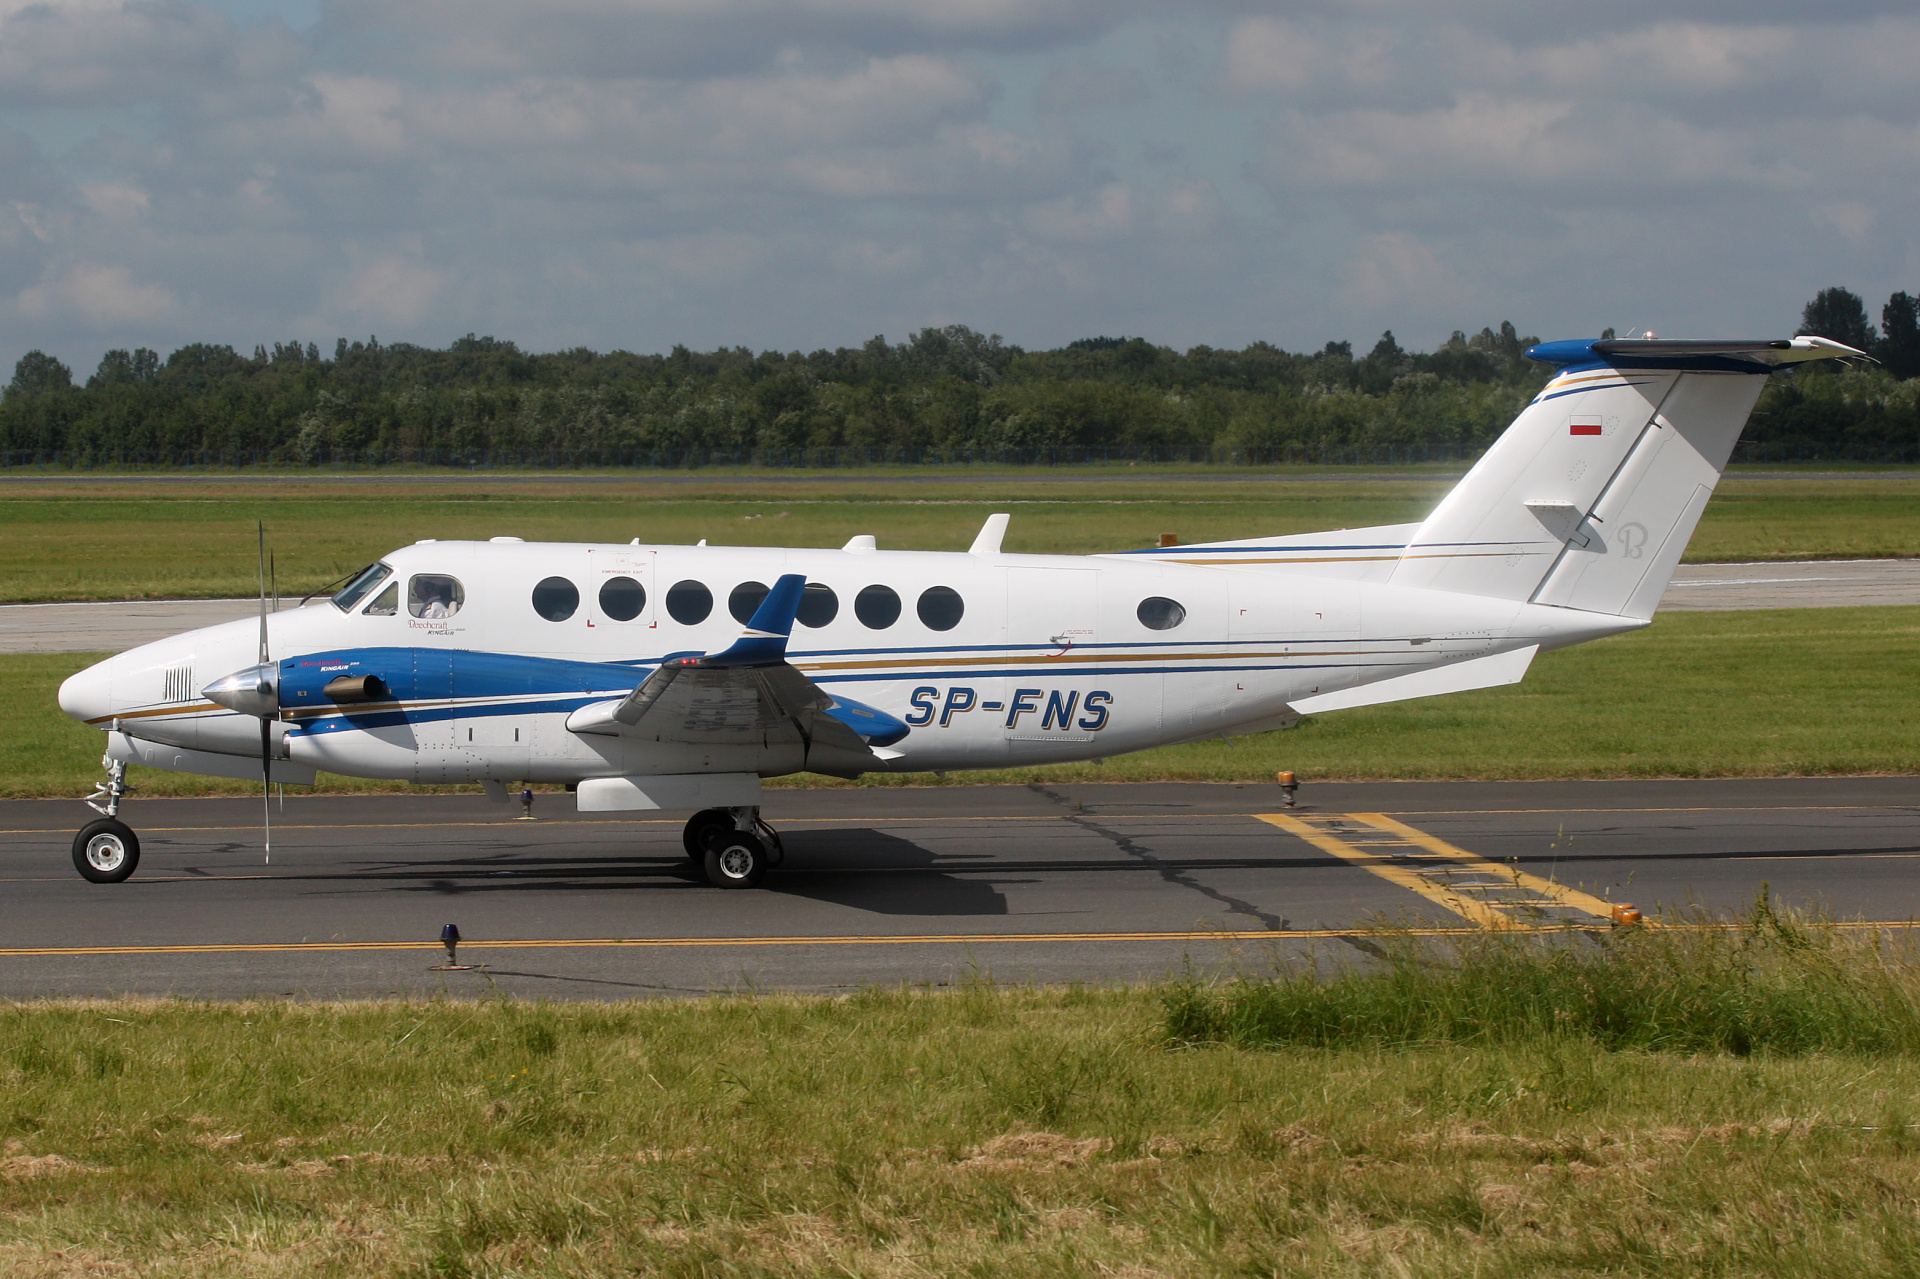 350, SP-FNS, White Eagle Aviation (Aircraft » EPWA Spotting » Beechcraft King Air)